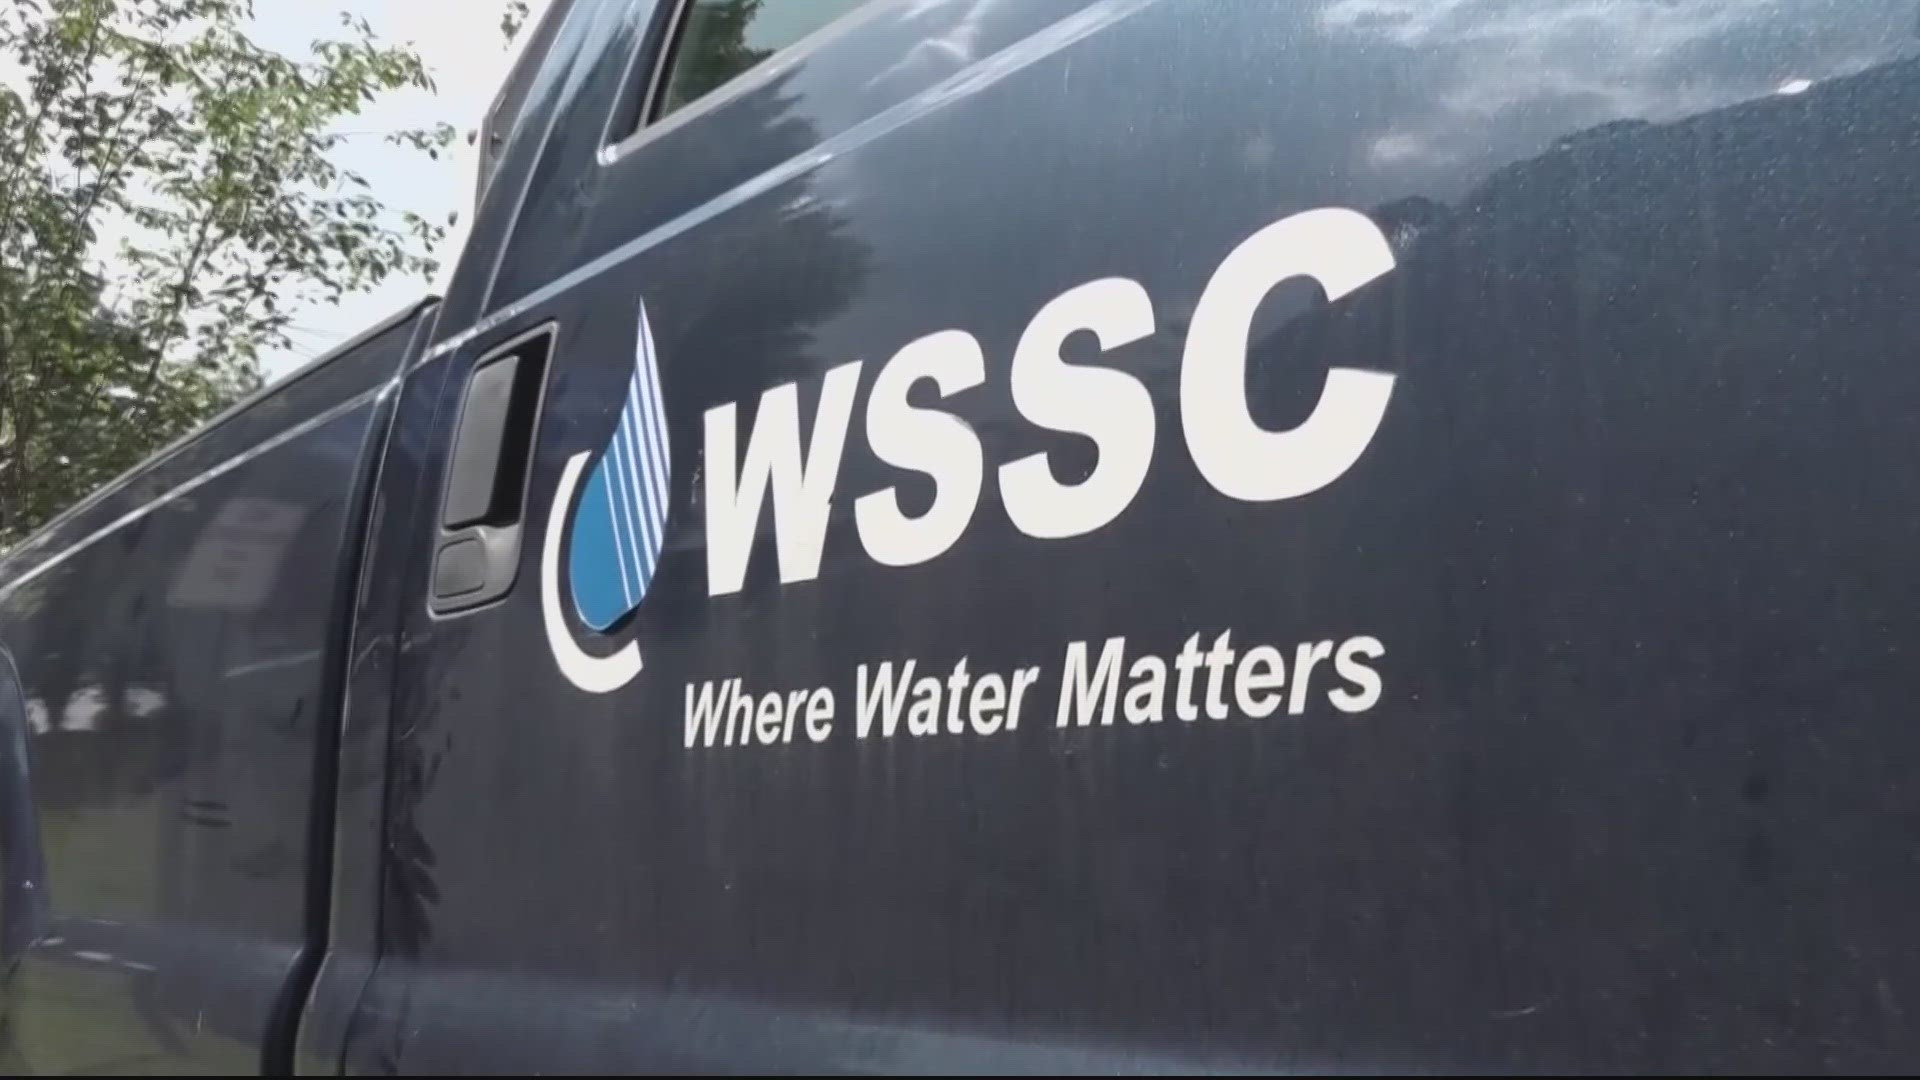 WSSC Water recently launched its temporary water bill amnesty initiative. The program's goal is to help eligible customers who are behind on their water bill payment